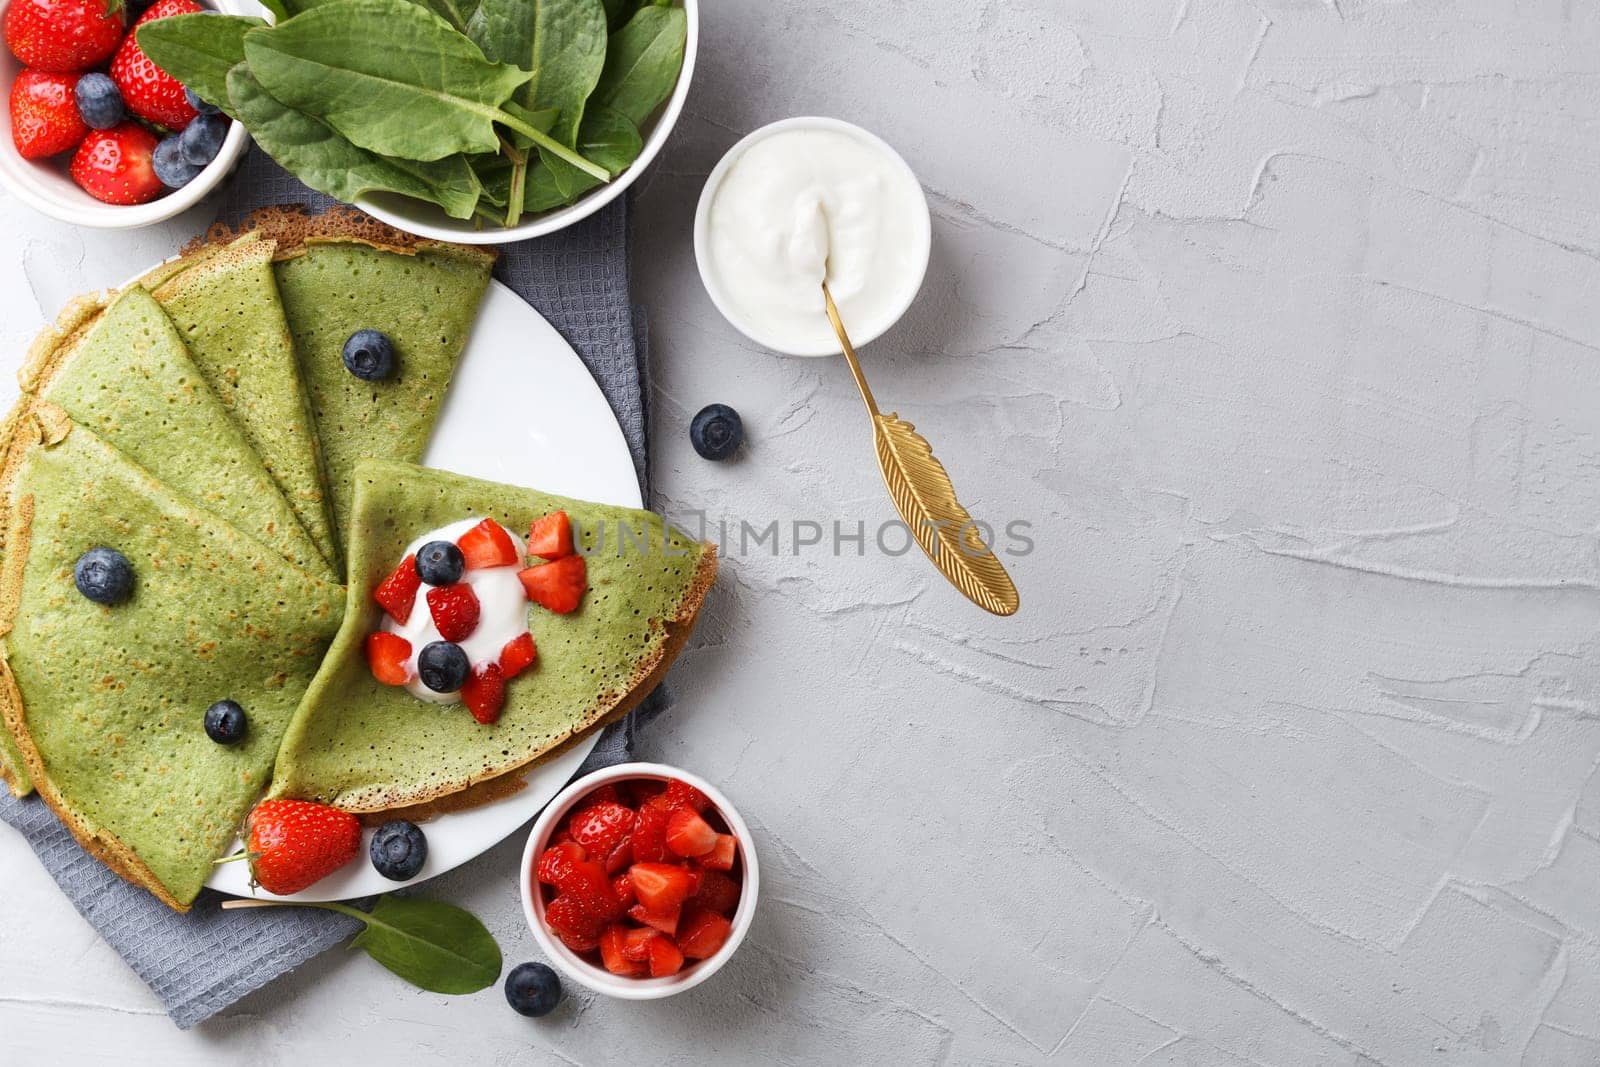 Green pancakes with spinach on a plate with fresh berries and sour cream, on a gray background with textiles. copy space